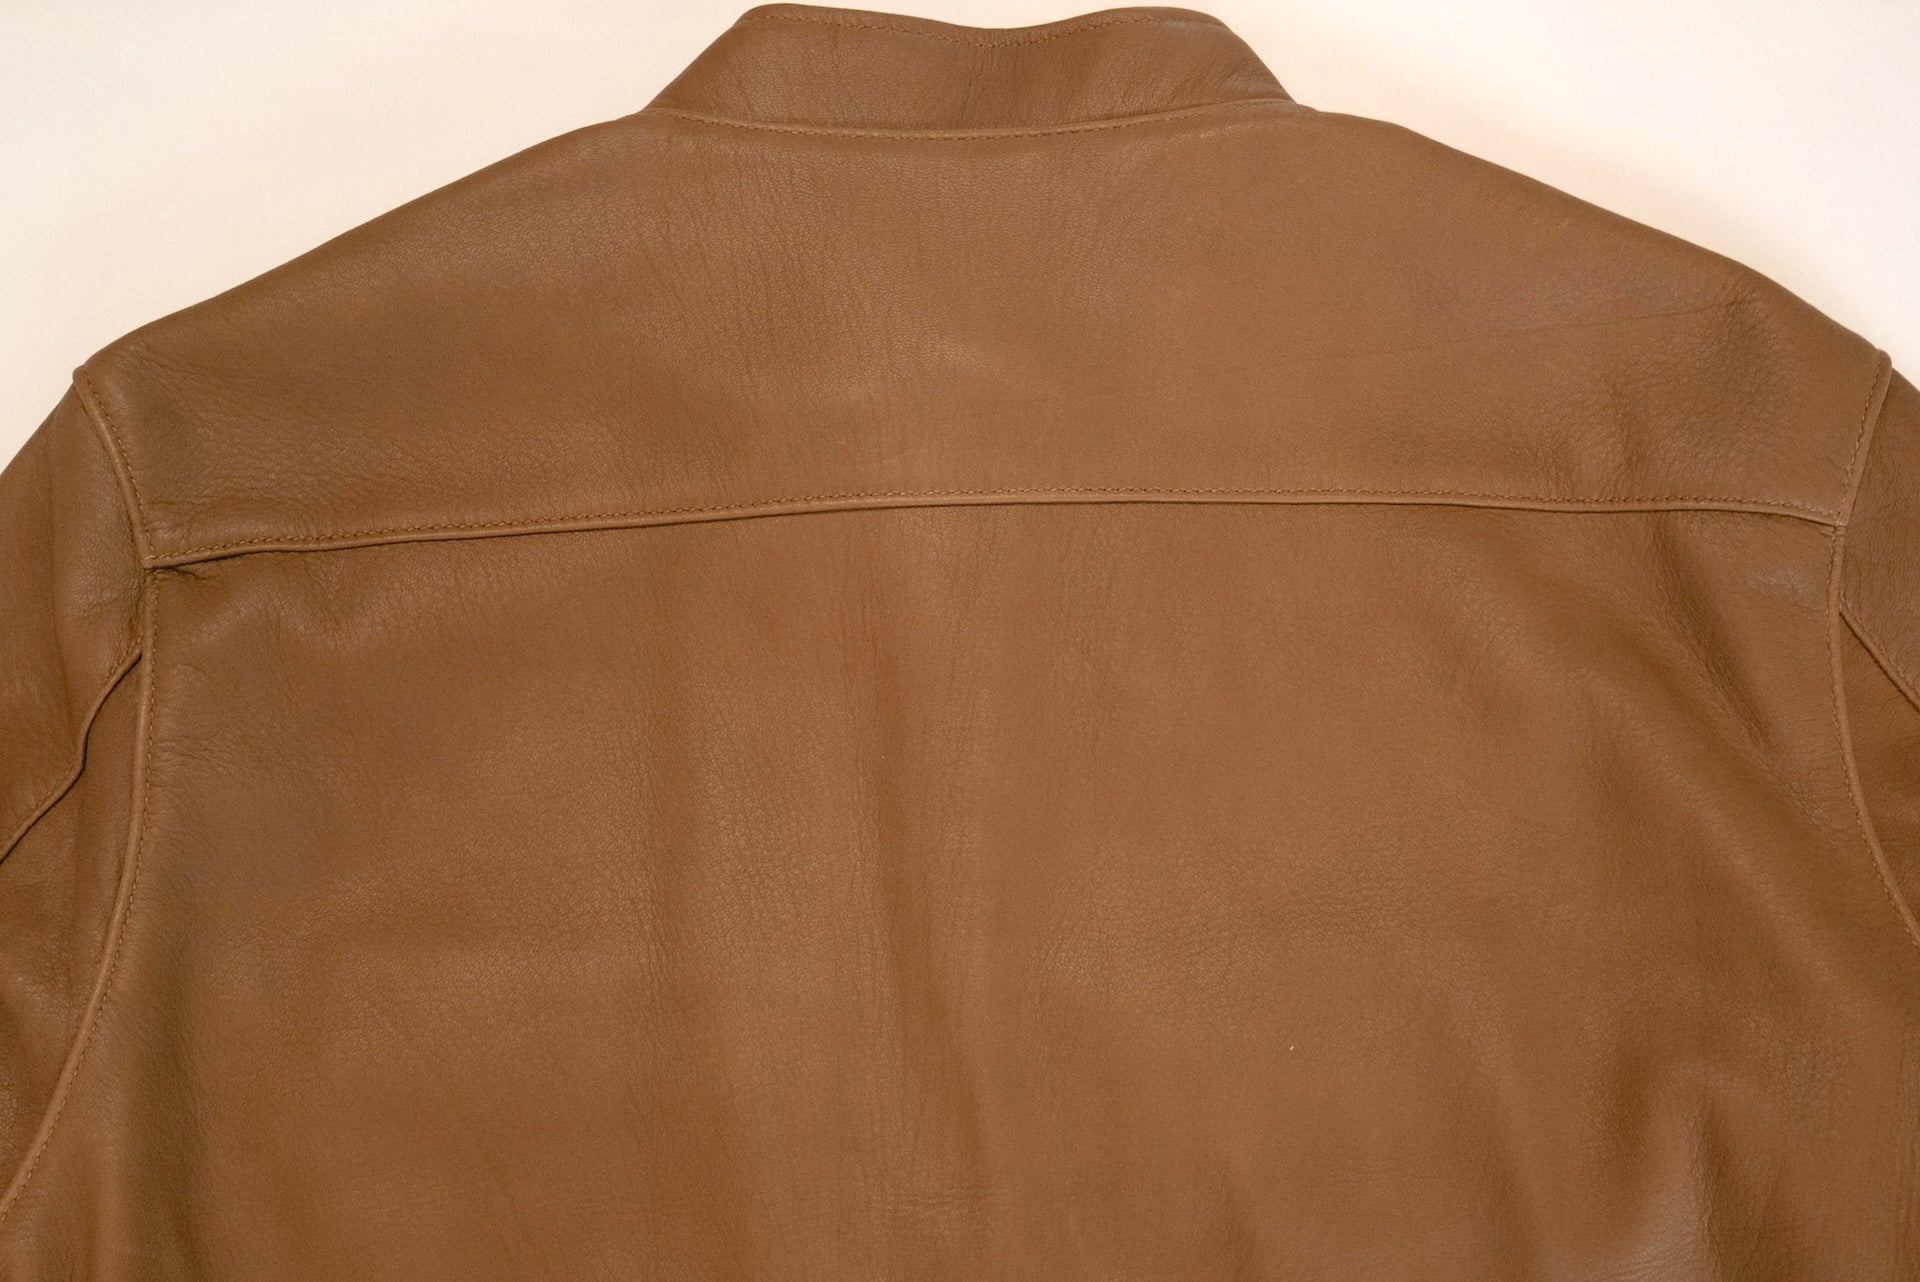 The Flat Head X CORLECTION Deerskin Stand Collar Single Riders Jacket (Brown)